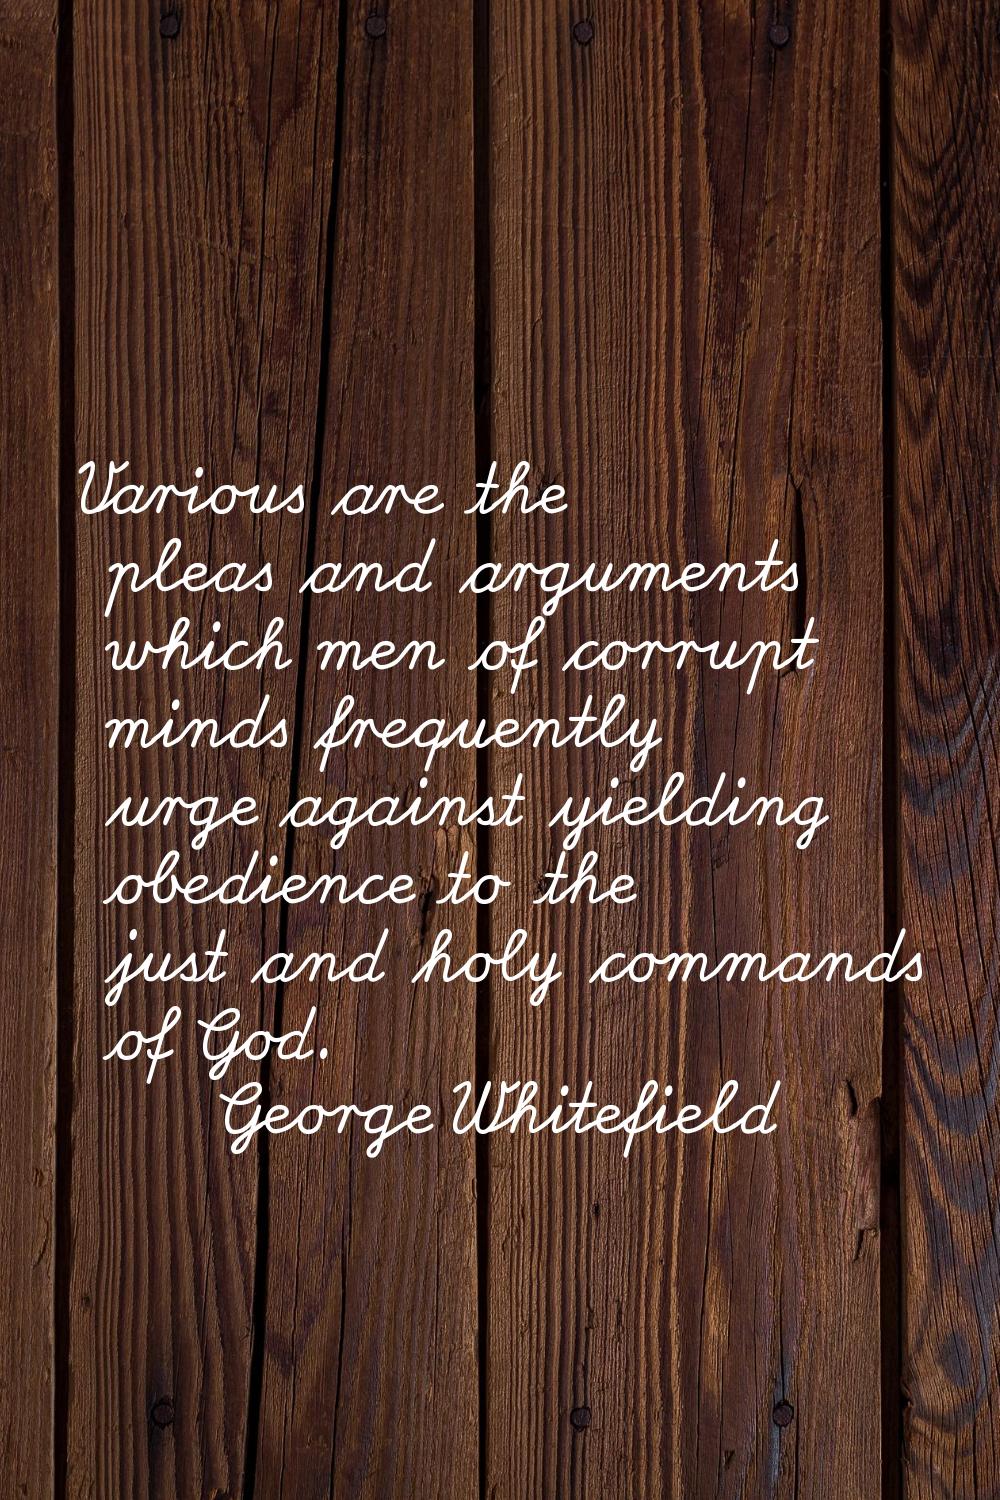 Various are the pleas and arguments which men of corrupt minds frequently urge against yielding obe